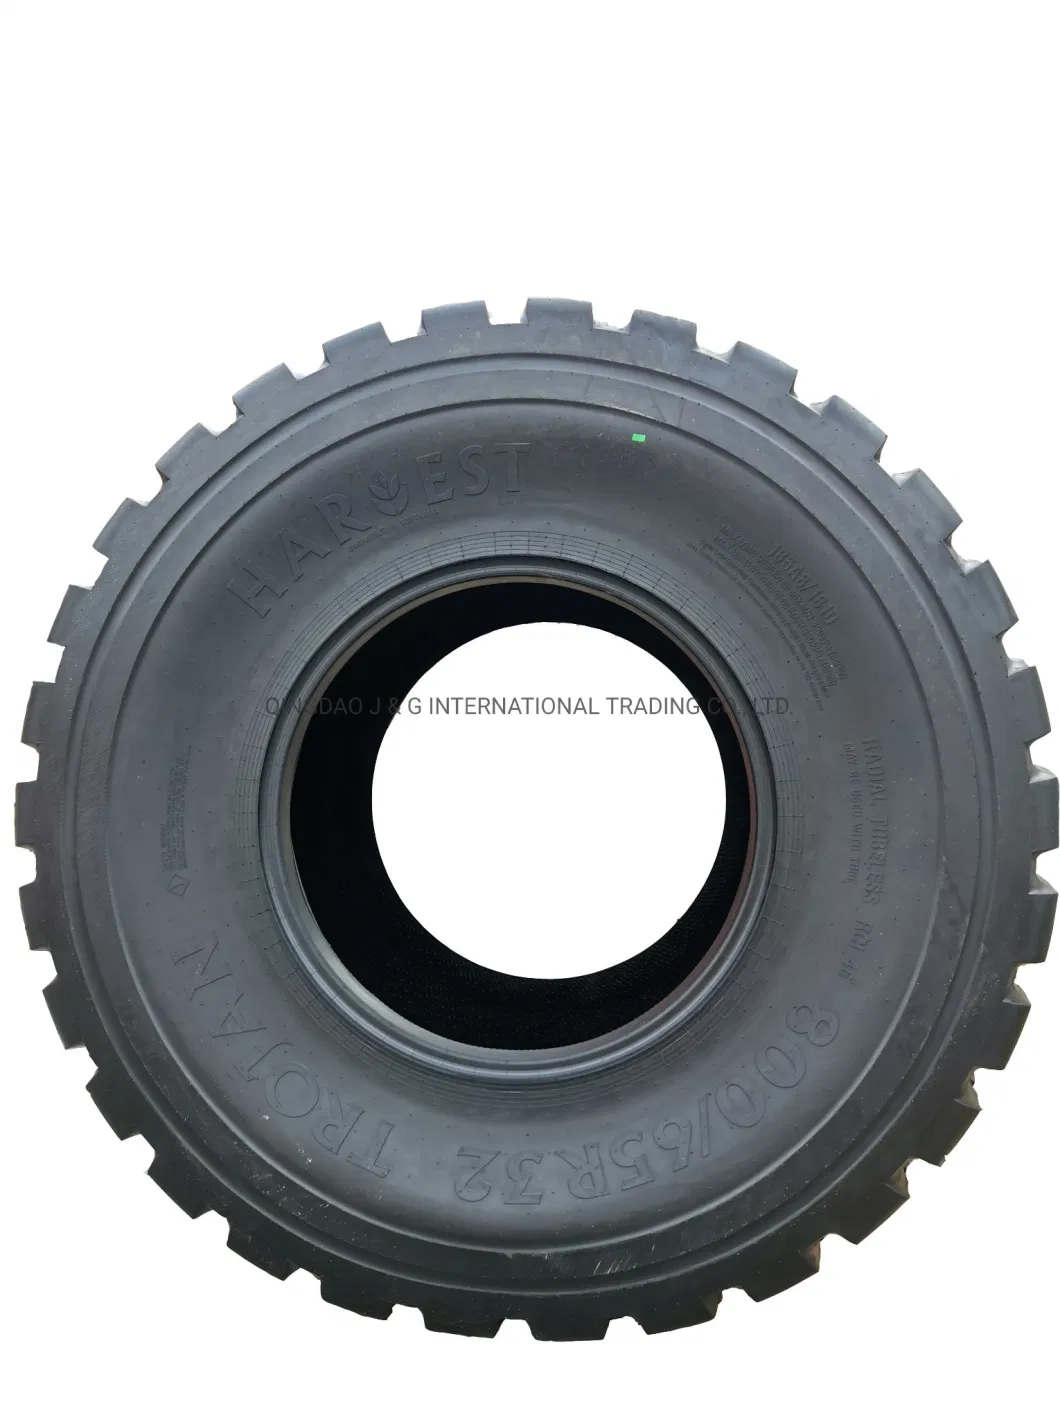 Radial Agricultural Tractor Harvester Tire 800/65r32